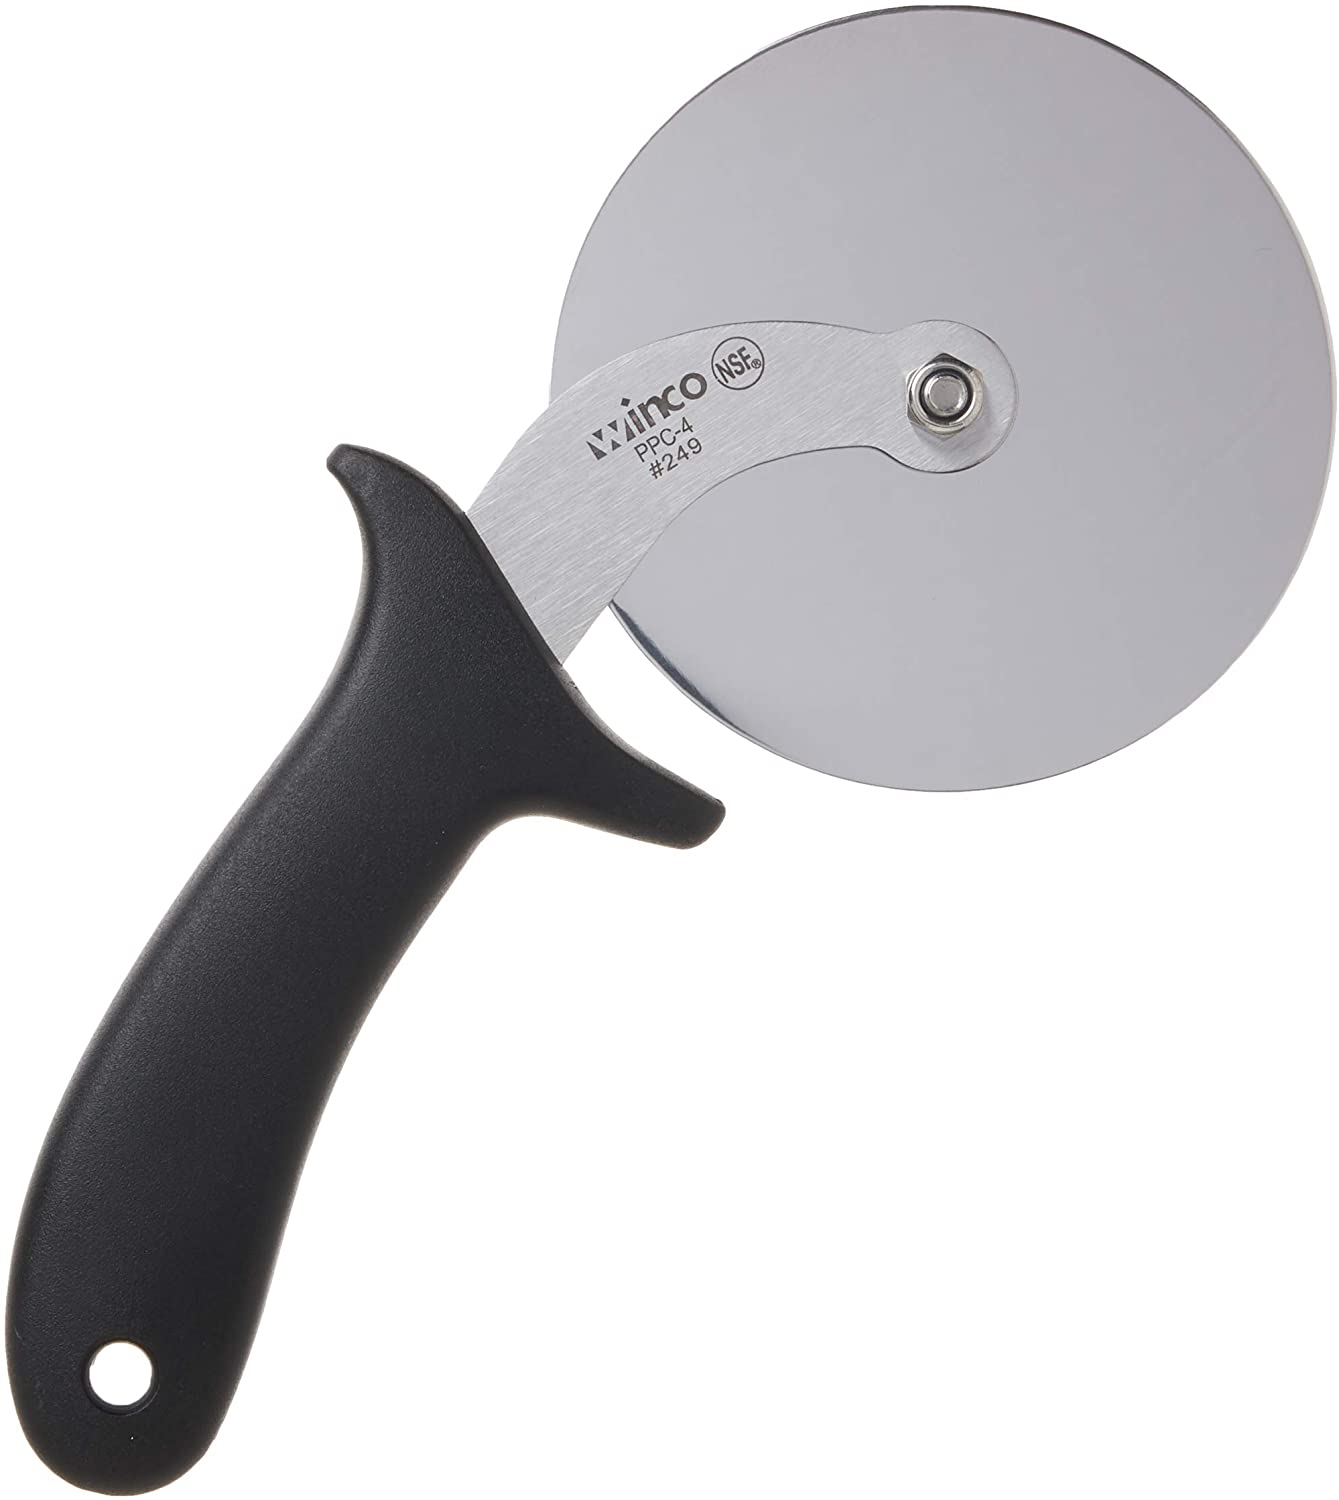 Winco Winware Pizza Cutter 4-Inch Blade with Handle - Stainless Steel $4.54